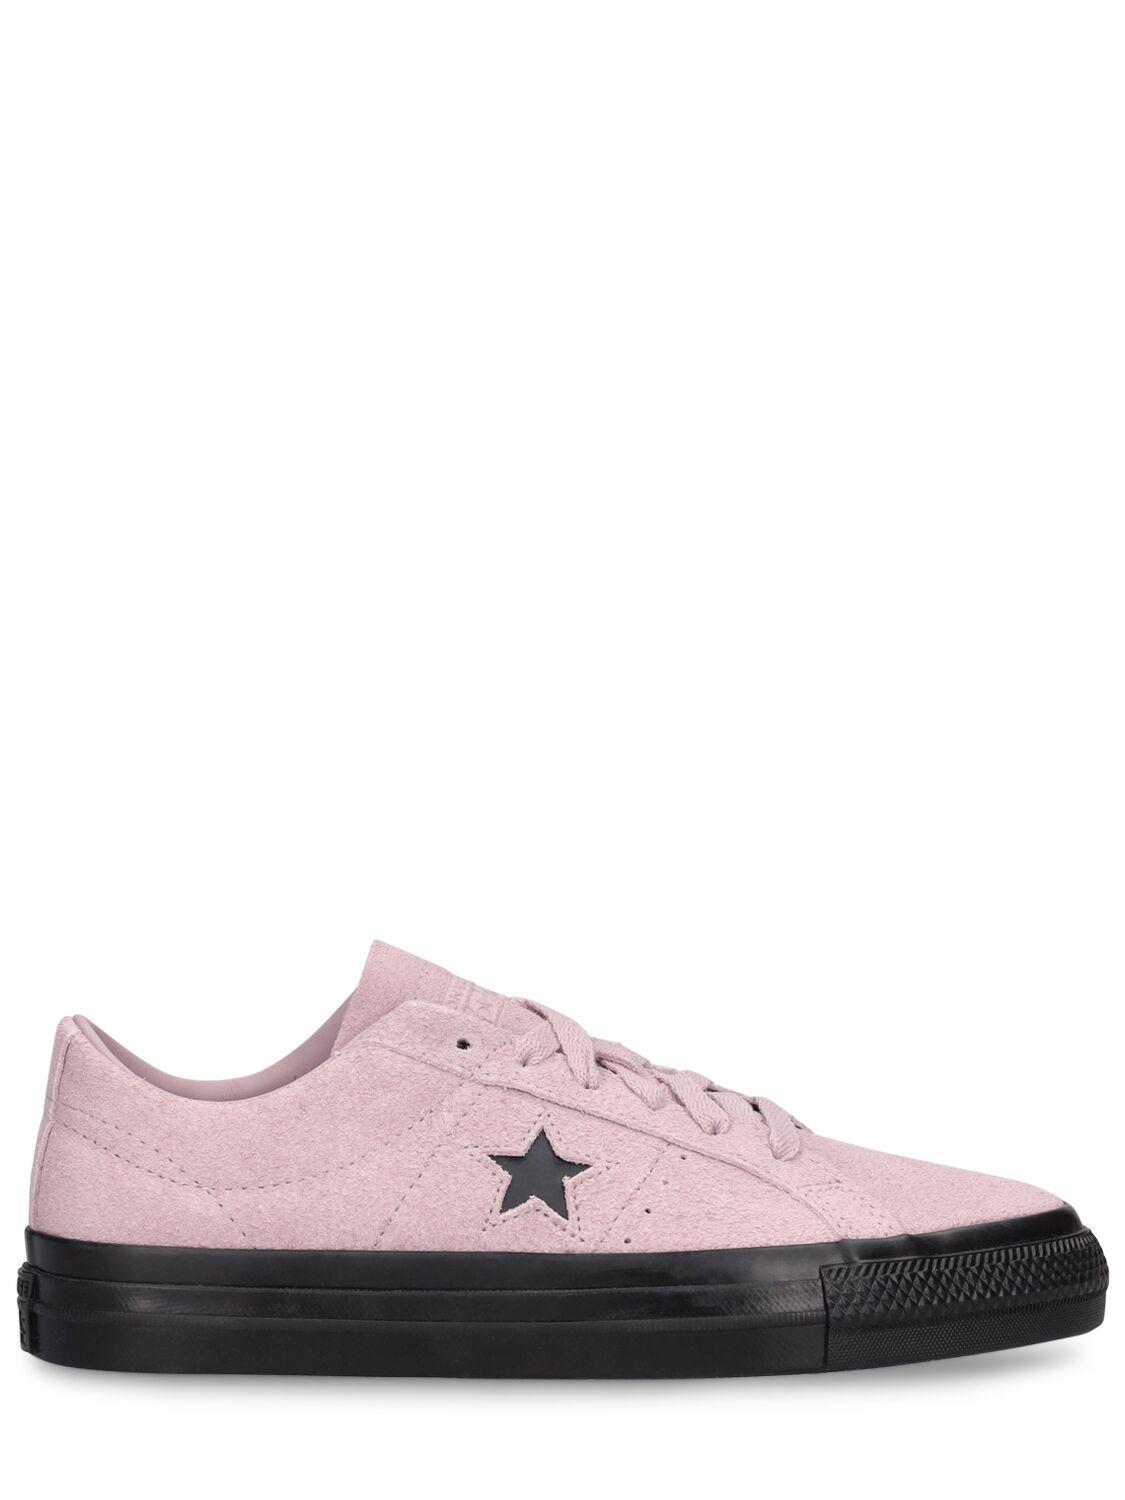 Converse One Star Pro Classic Sneakers in Pink | Lyst